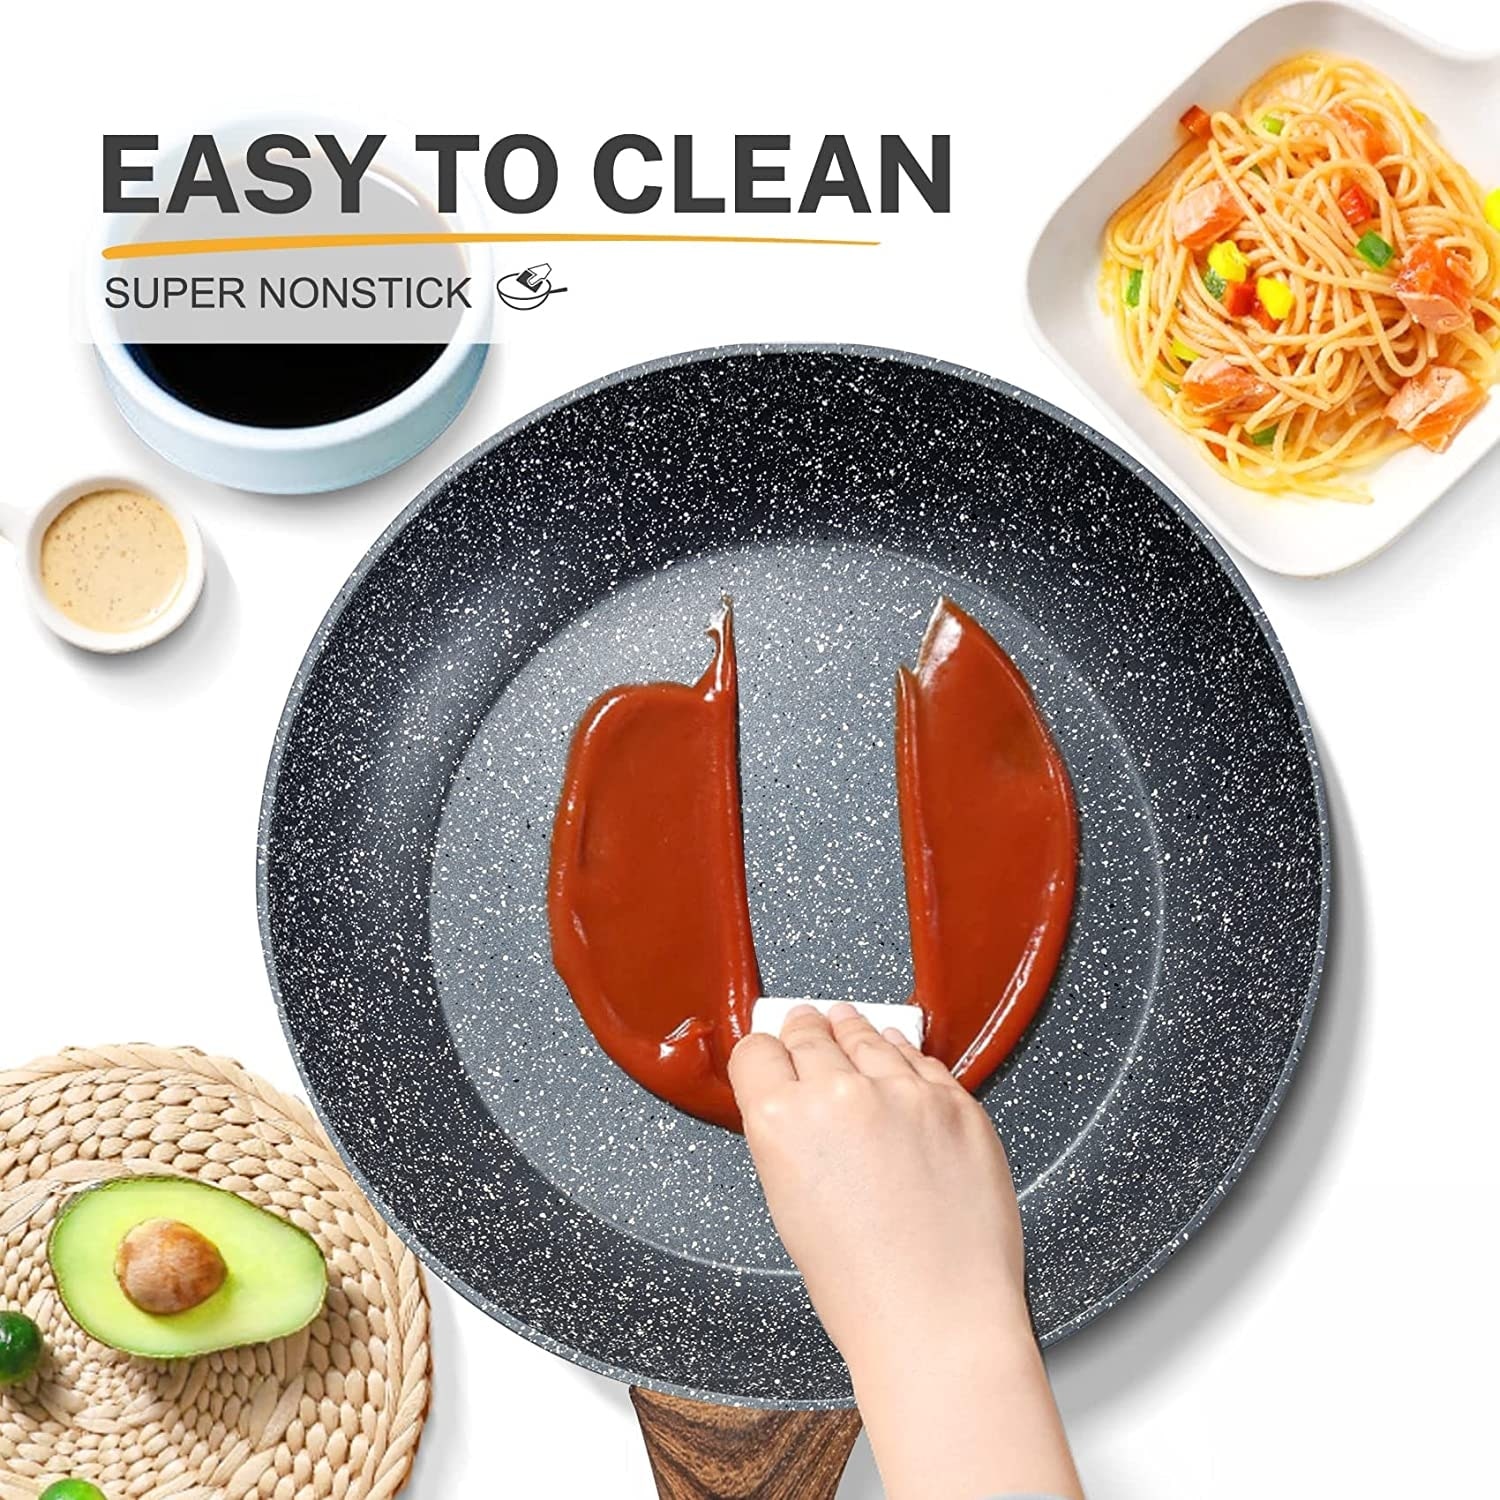 https://ak1.ostkcdn.com/images/products/is/images/direct/e743ef8aae11241b55bf0a6bf4323c00f3294754/Induction-Cookware-Set%2C-Non-Stick-Granite-Pots-and-Pans-Set-for-Stove%2C-8-Pieces%2CDishwasher-Safe.jpg